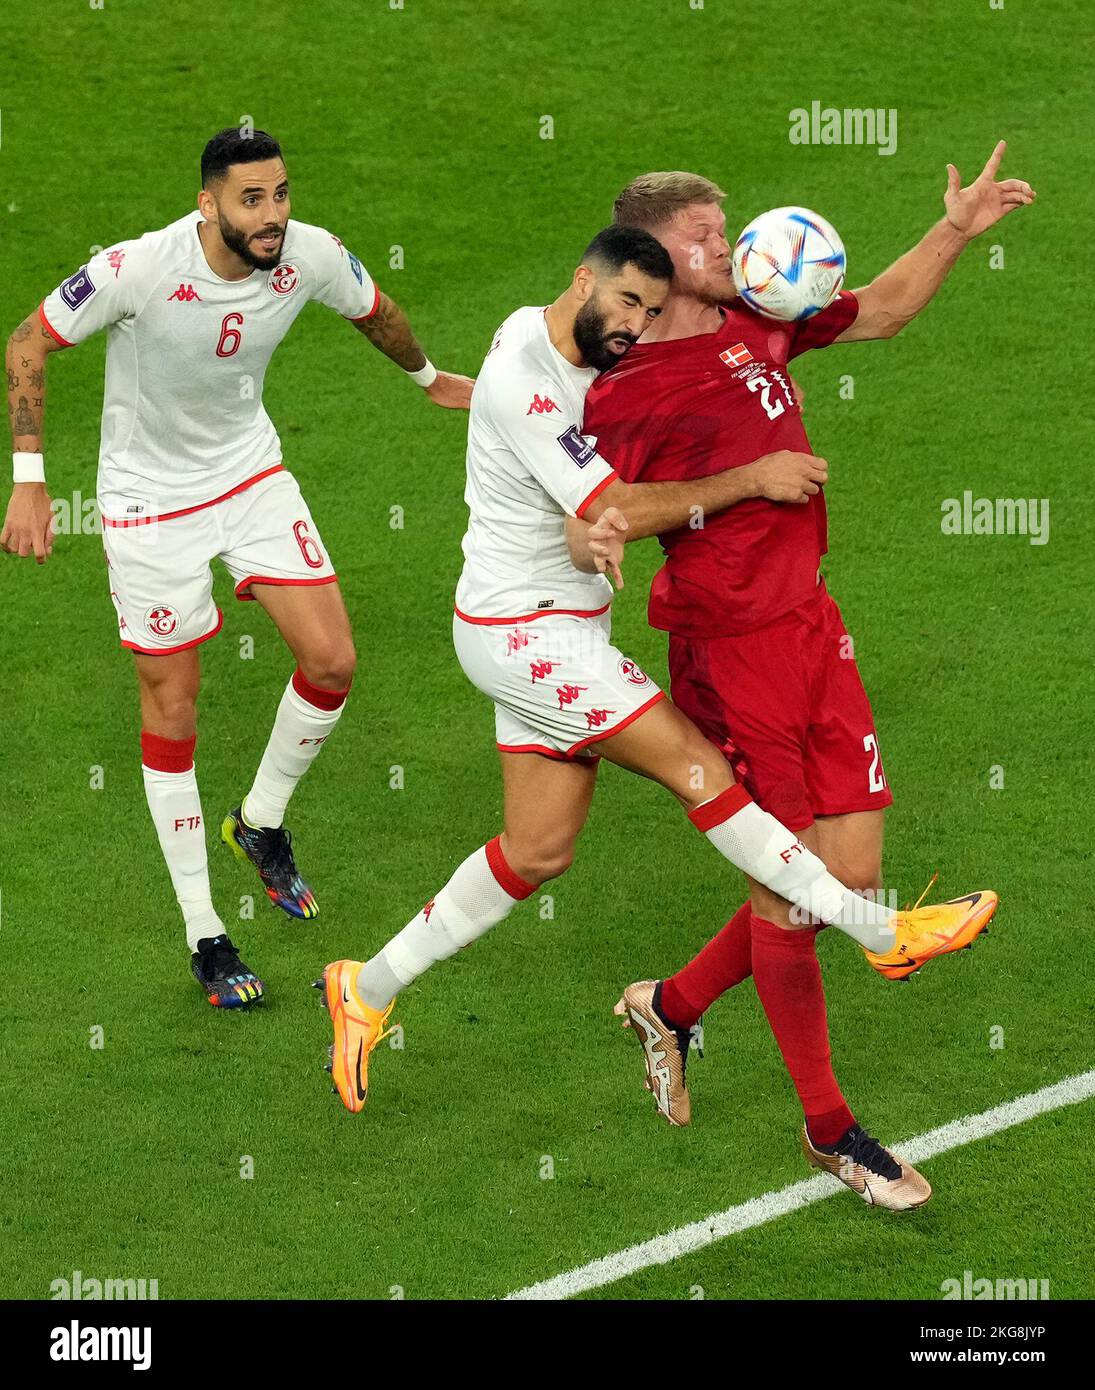 Denmark's Andreas Cornelius (right) and Tunisia's Yassine Meriah (centre) battle for the ball during the FIFA World Cup Group D match at Education City Stadium, Al Rayyan. Picture date: Tuesday November 22, 2022. Stock Photo